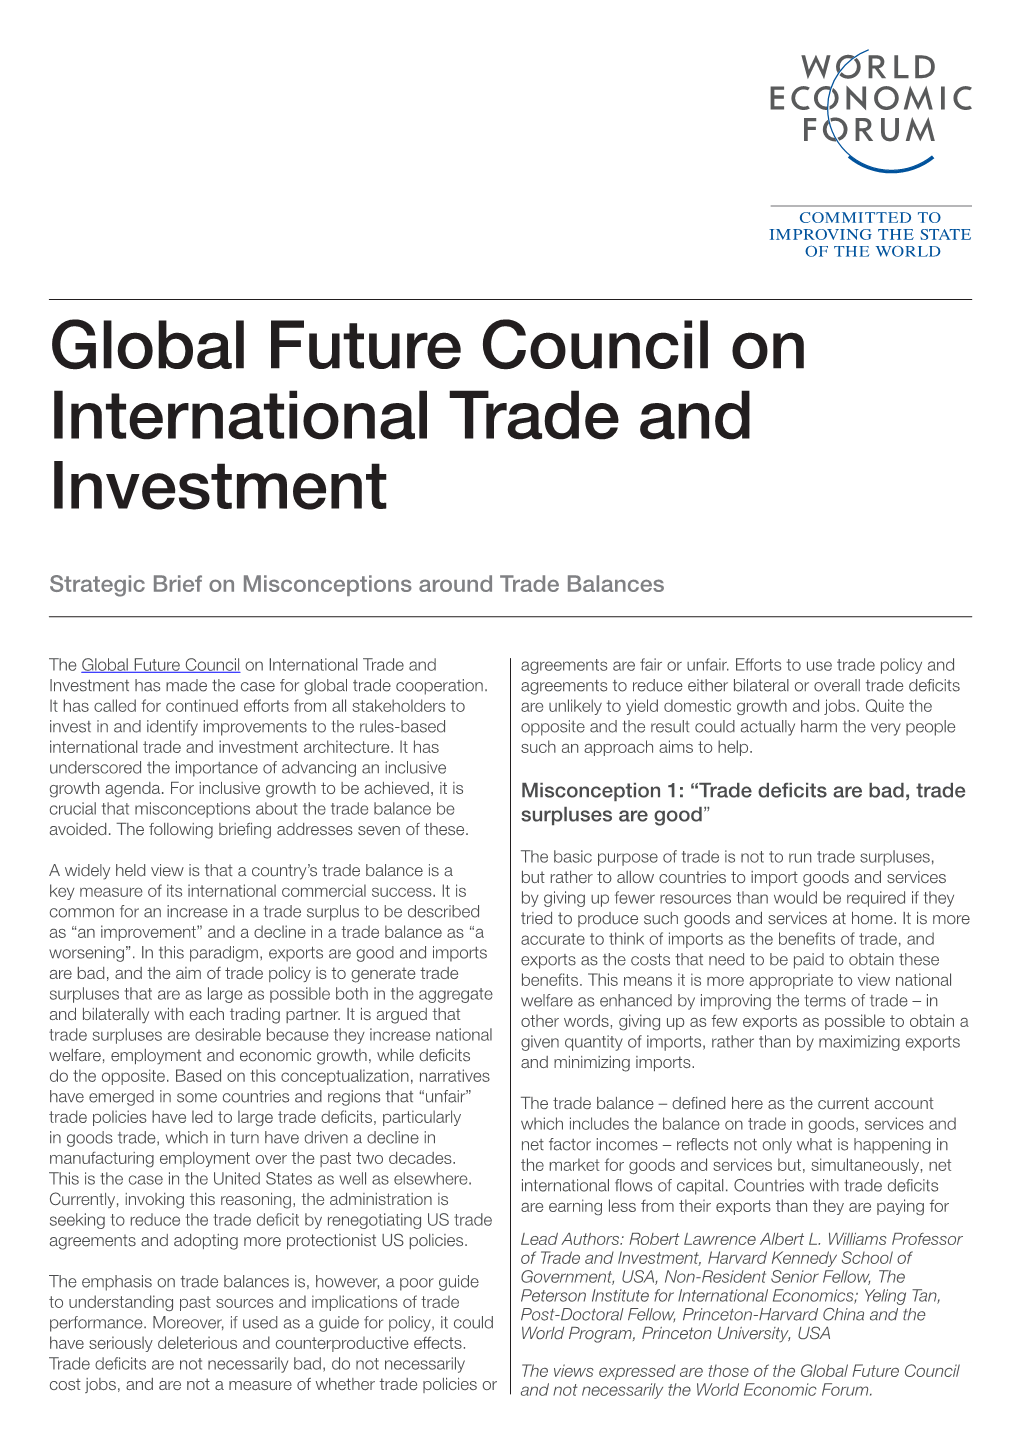 Global Future Council on International Trade and Investment